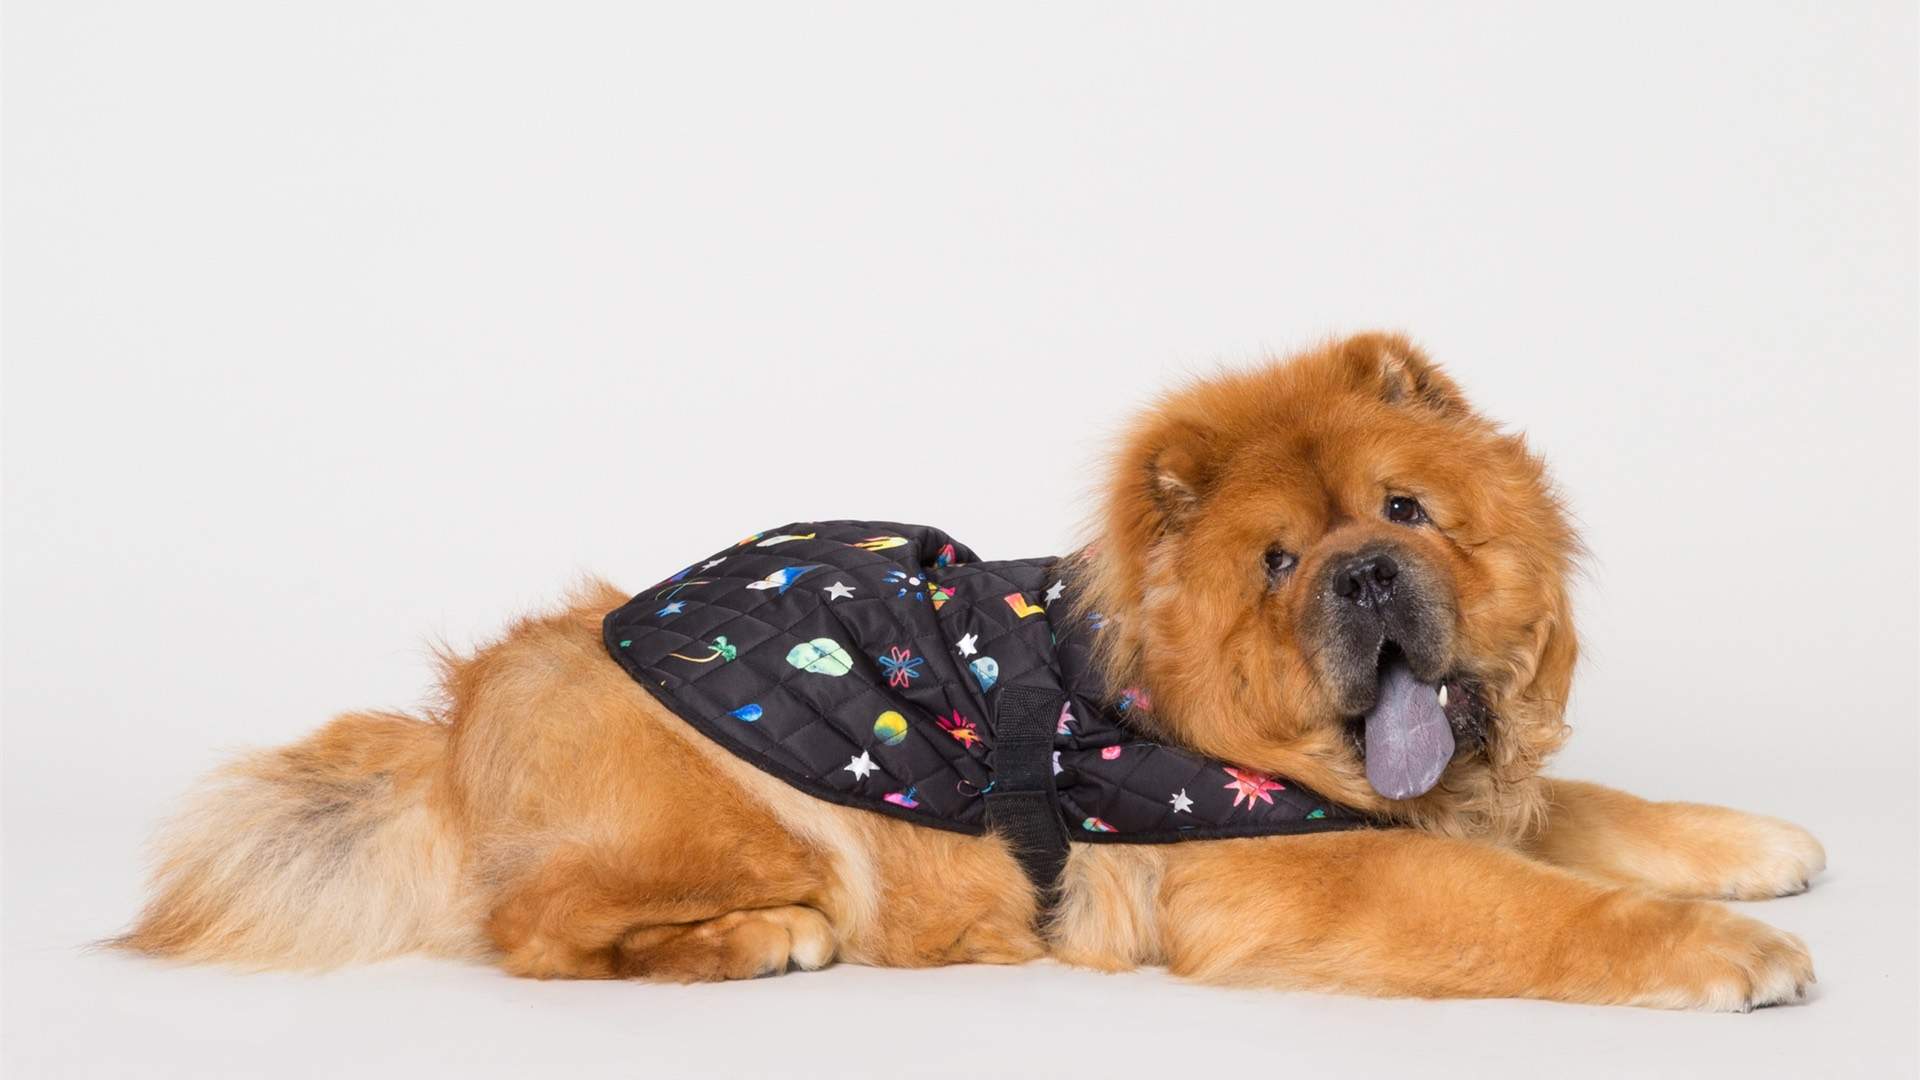 Gorman Has Just Dropped a New Range of Raincoats for Very Good (Well-Dressed) Dogs